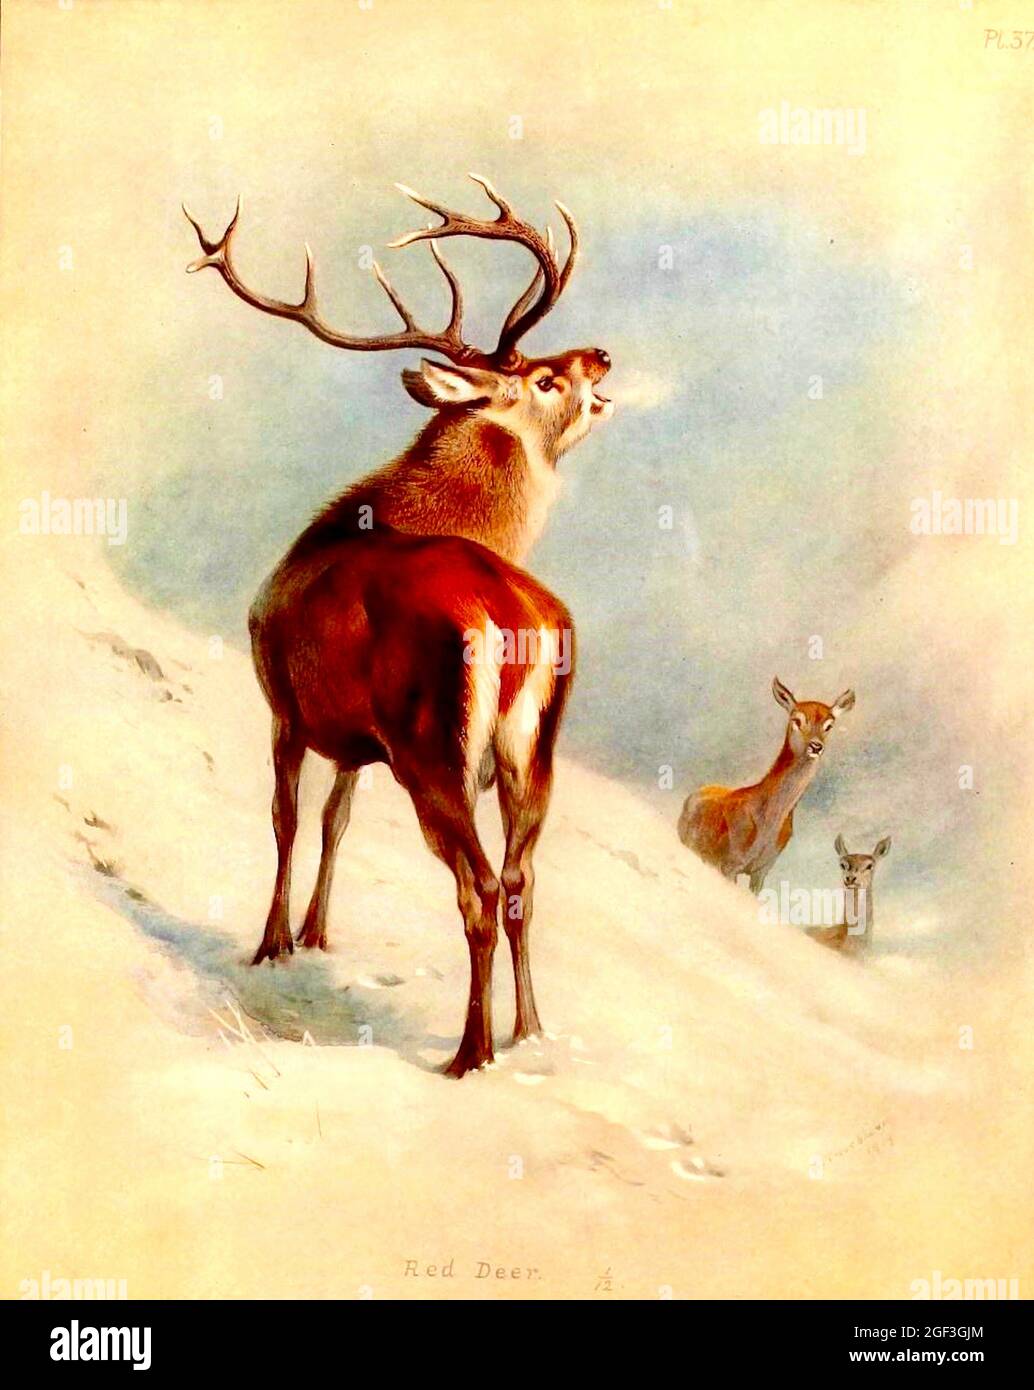 Archibald Thorburn - British Mammals - Red Deer Stag and does Stock Photo